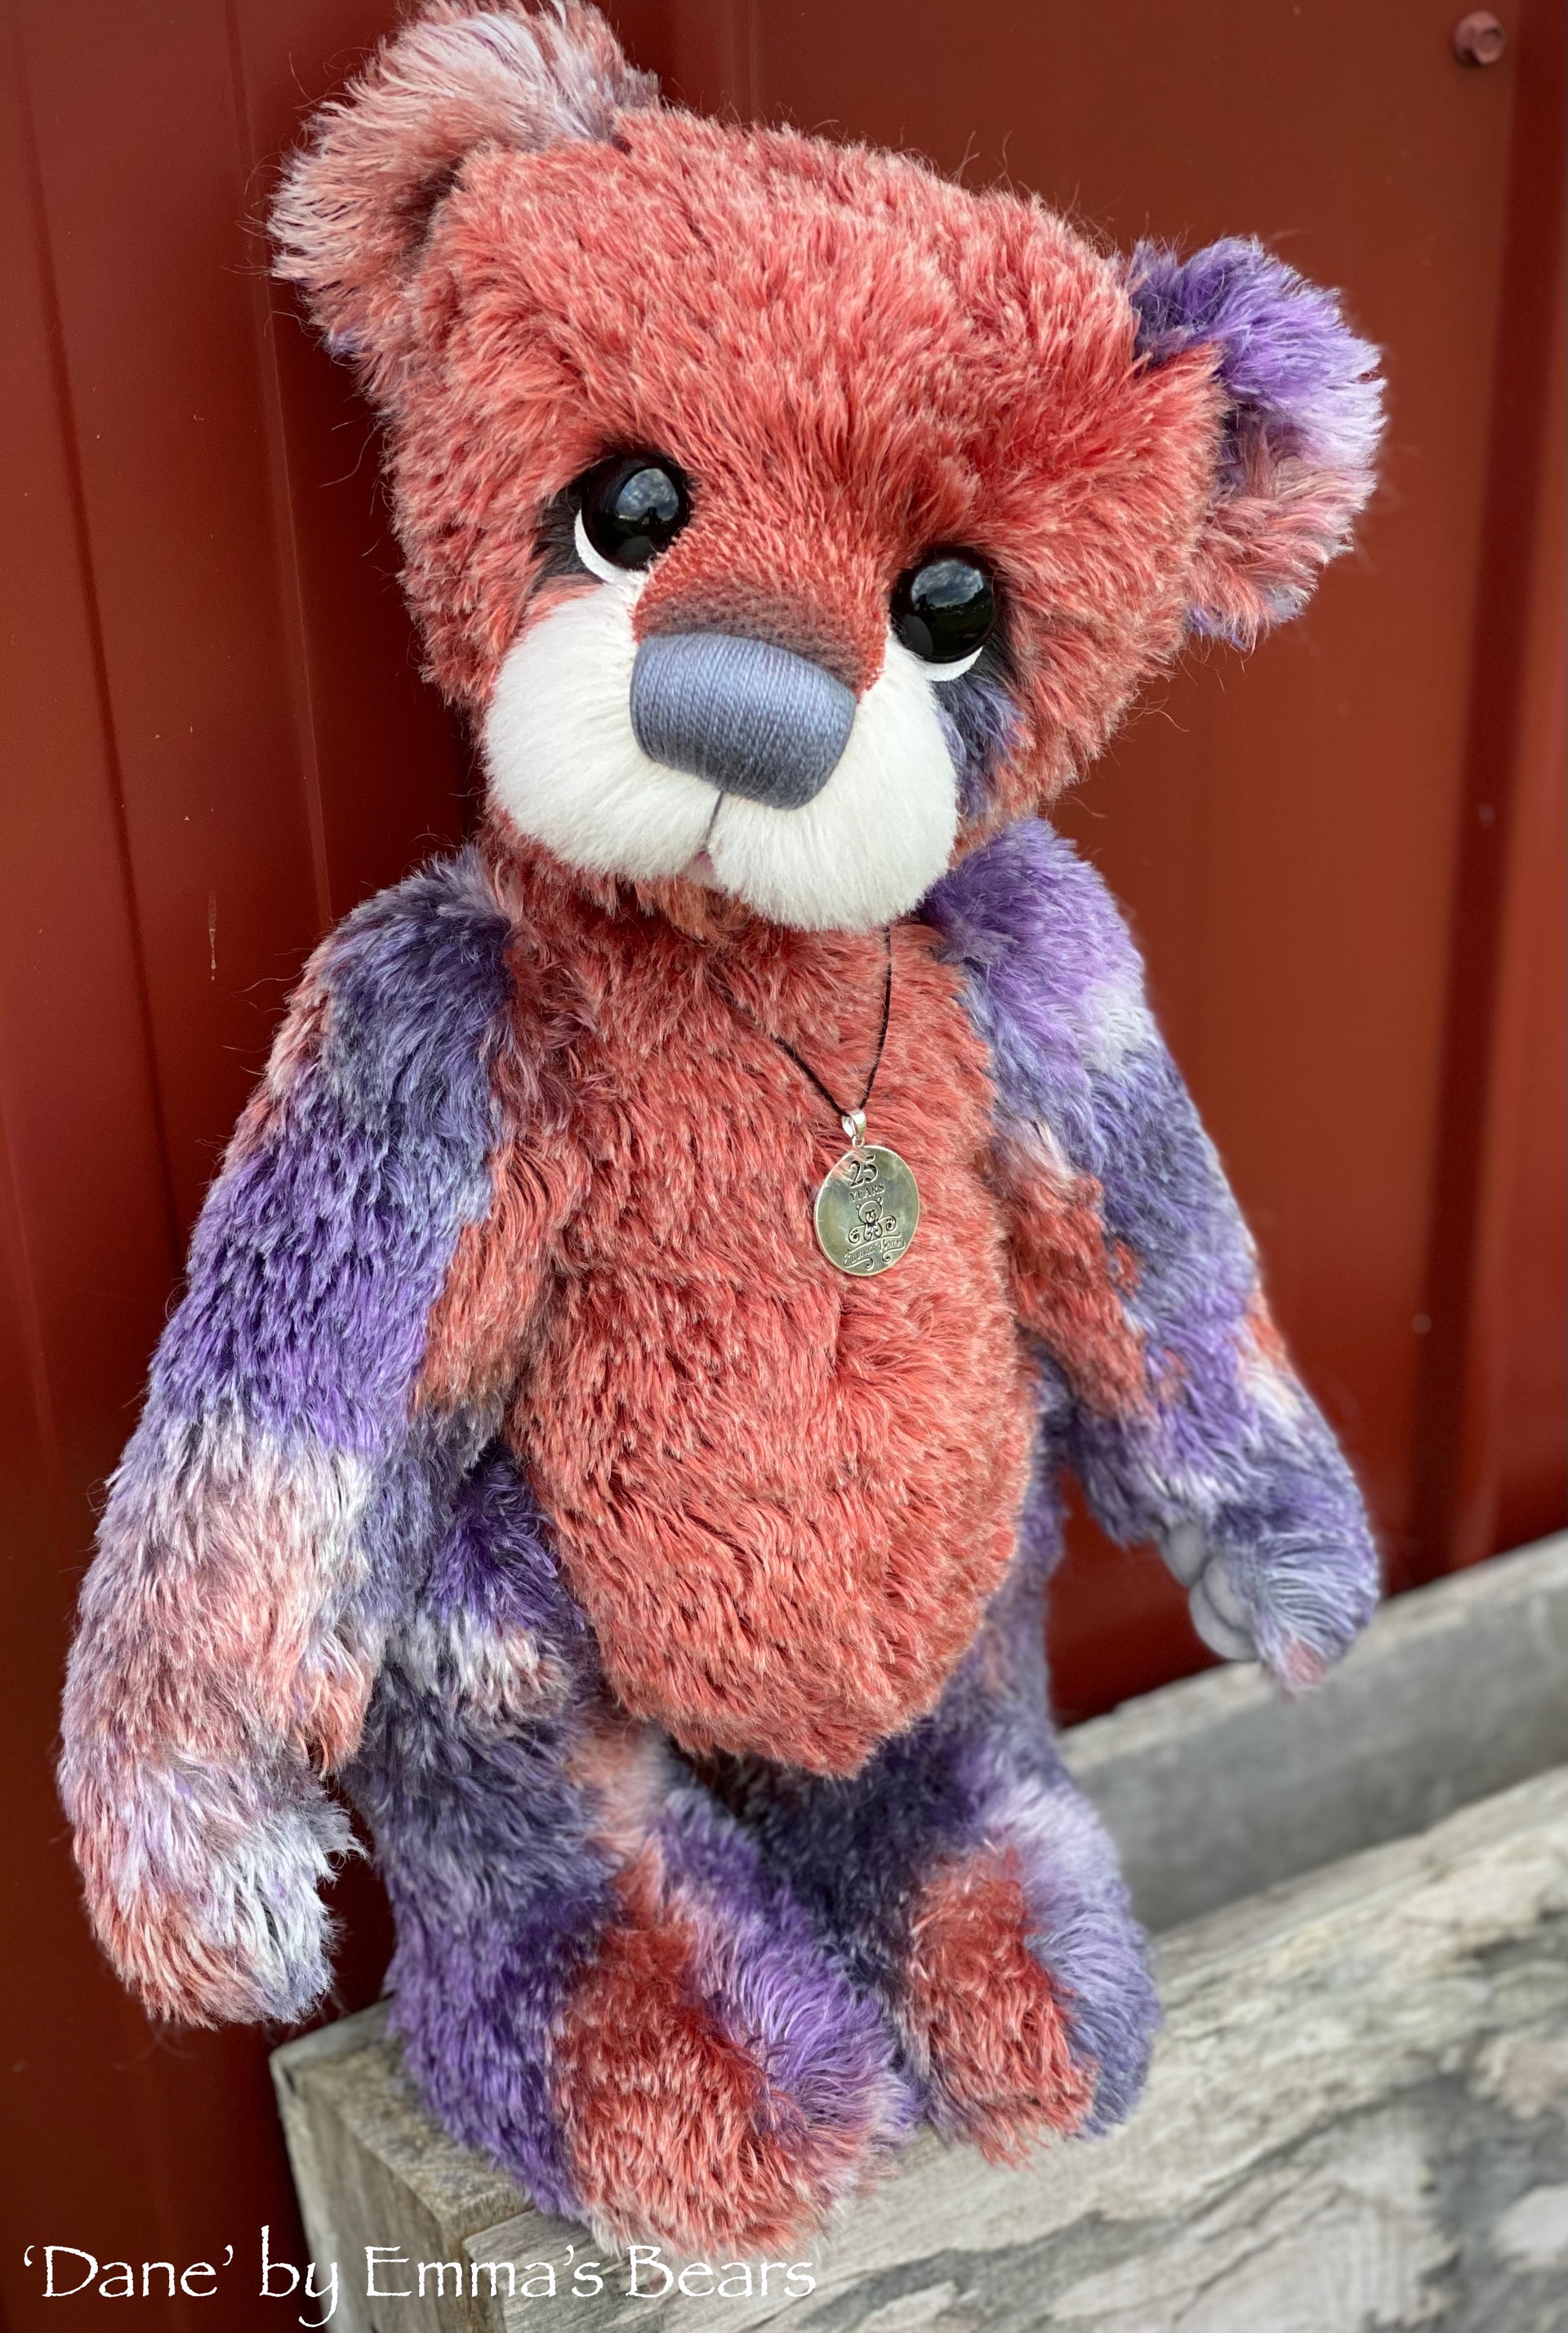 Dane - 16" SPECIAL 25th Anniversary Collection Hand-dyed mohair Artist Bear by Emmas Bears - OOAK